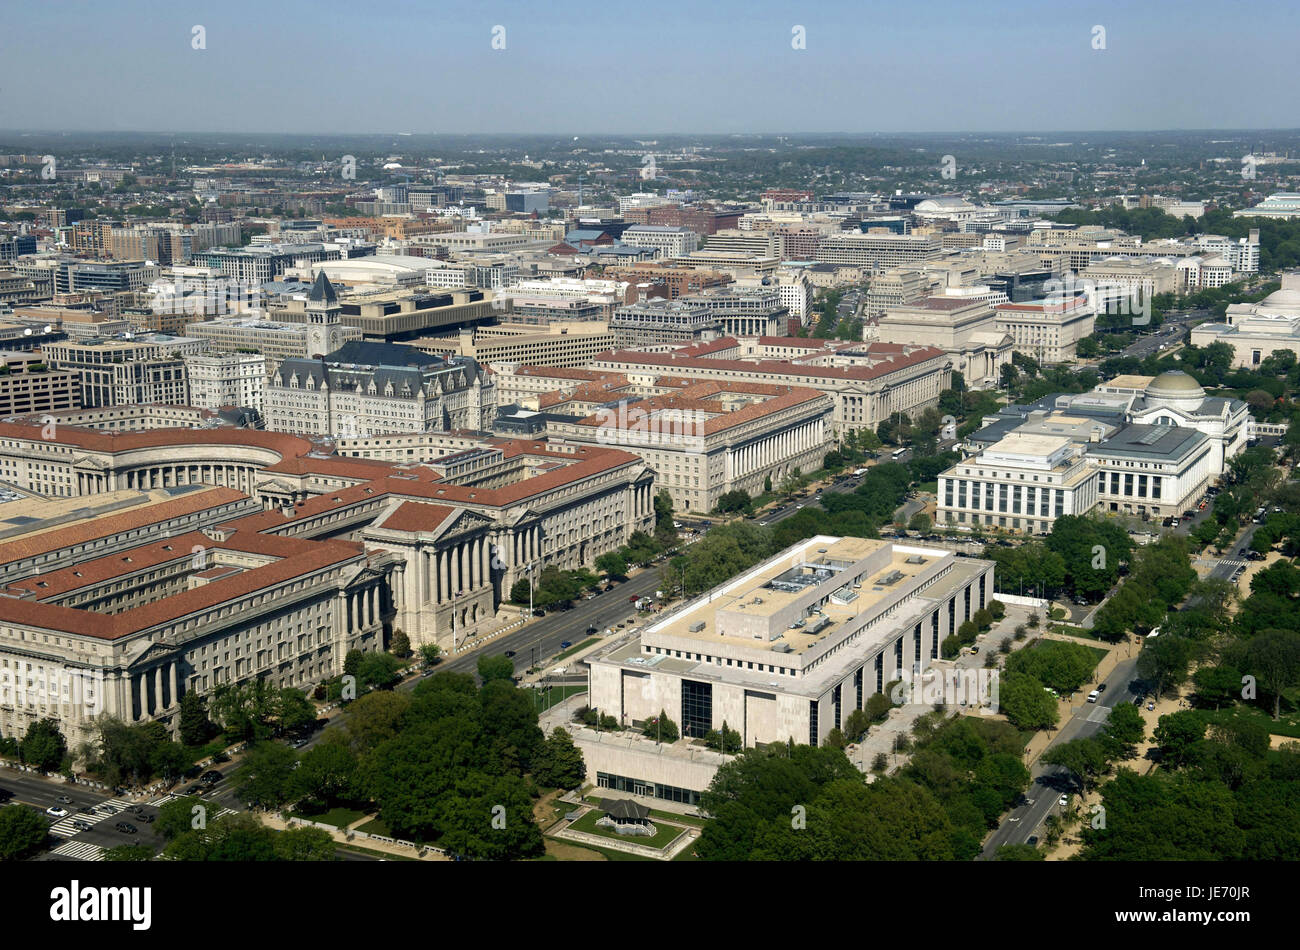 The USA, America, view at Washington D.C. and the Nationwide Mall, Stock Photo